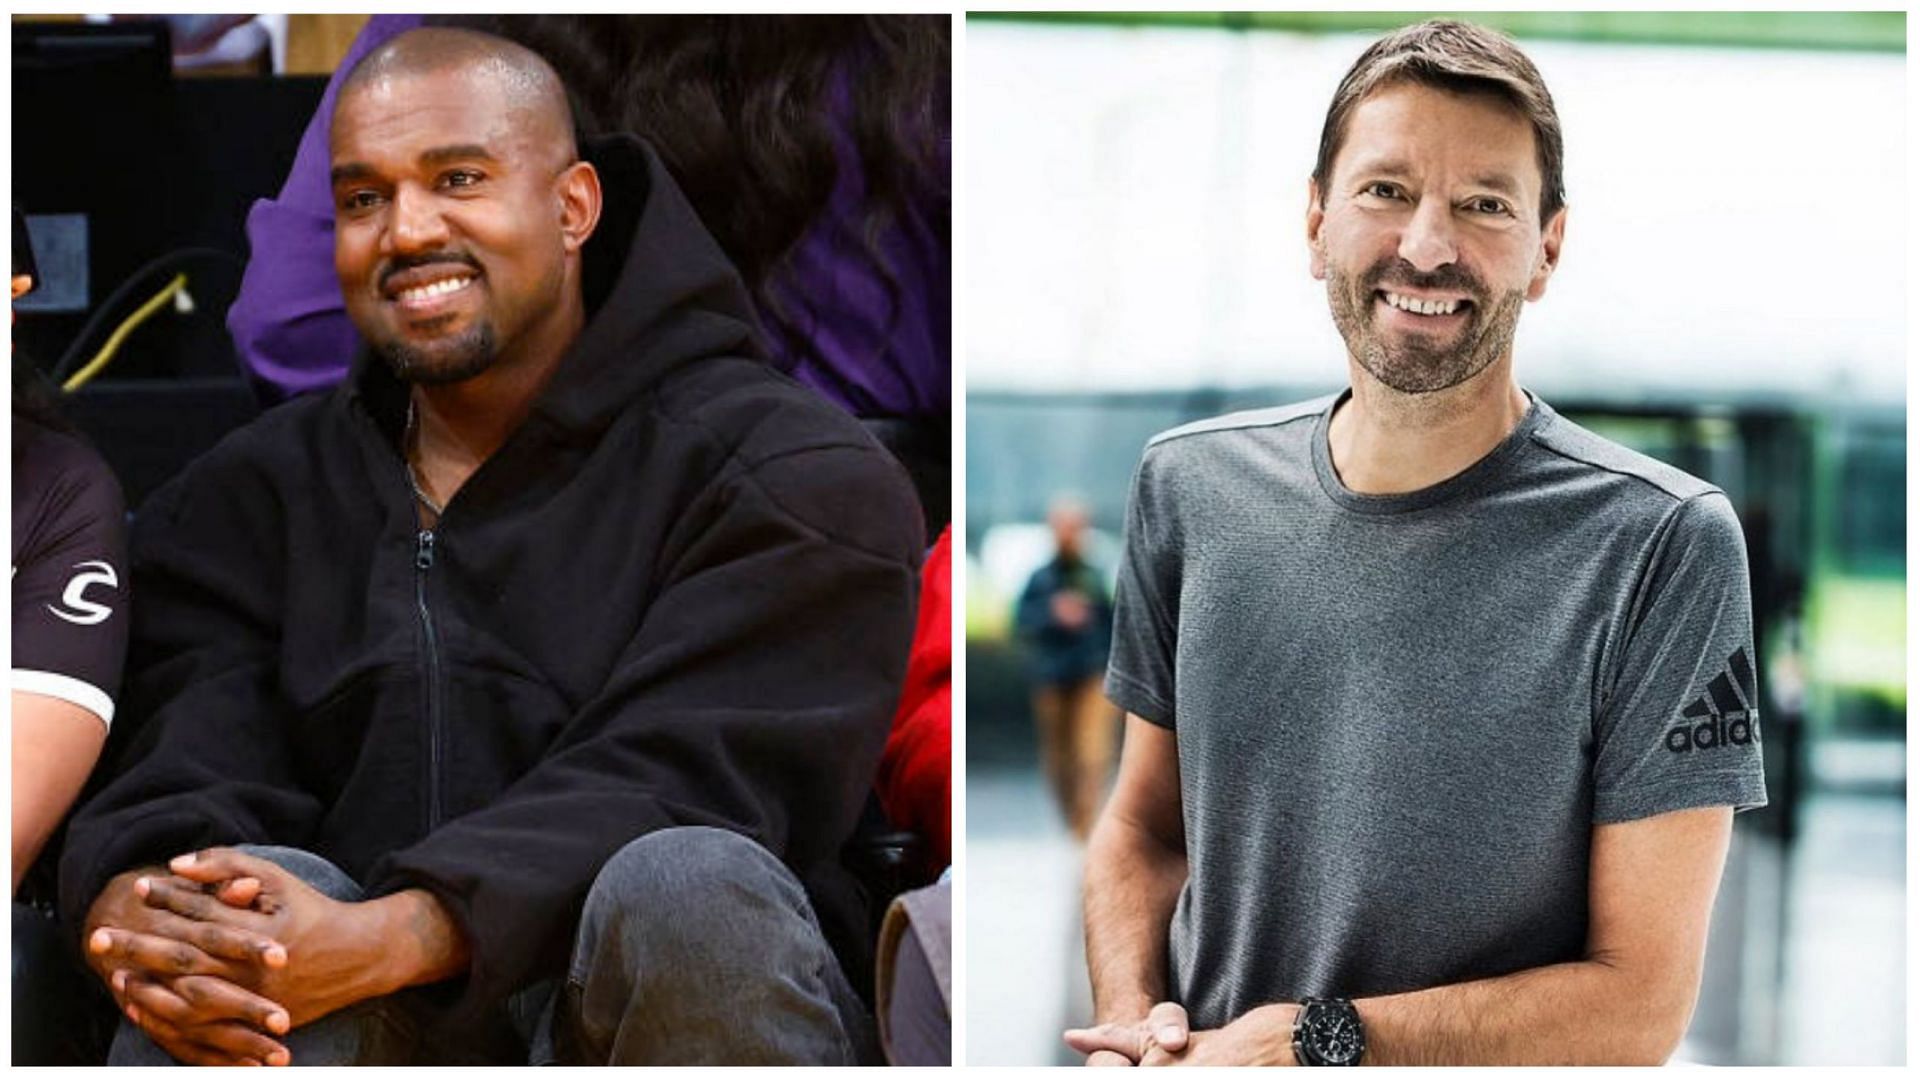 Kanye West is upset with Adidas CEO Kasper Rorsted (Image via Ronald Martinez/Getty Images and @businessinsider.de/Instagram)